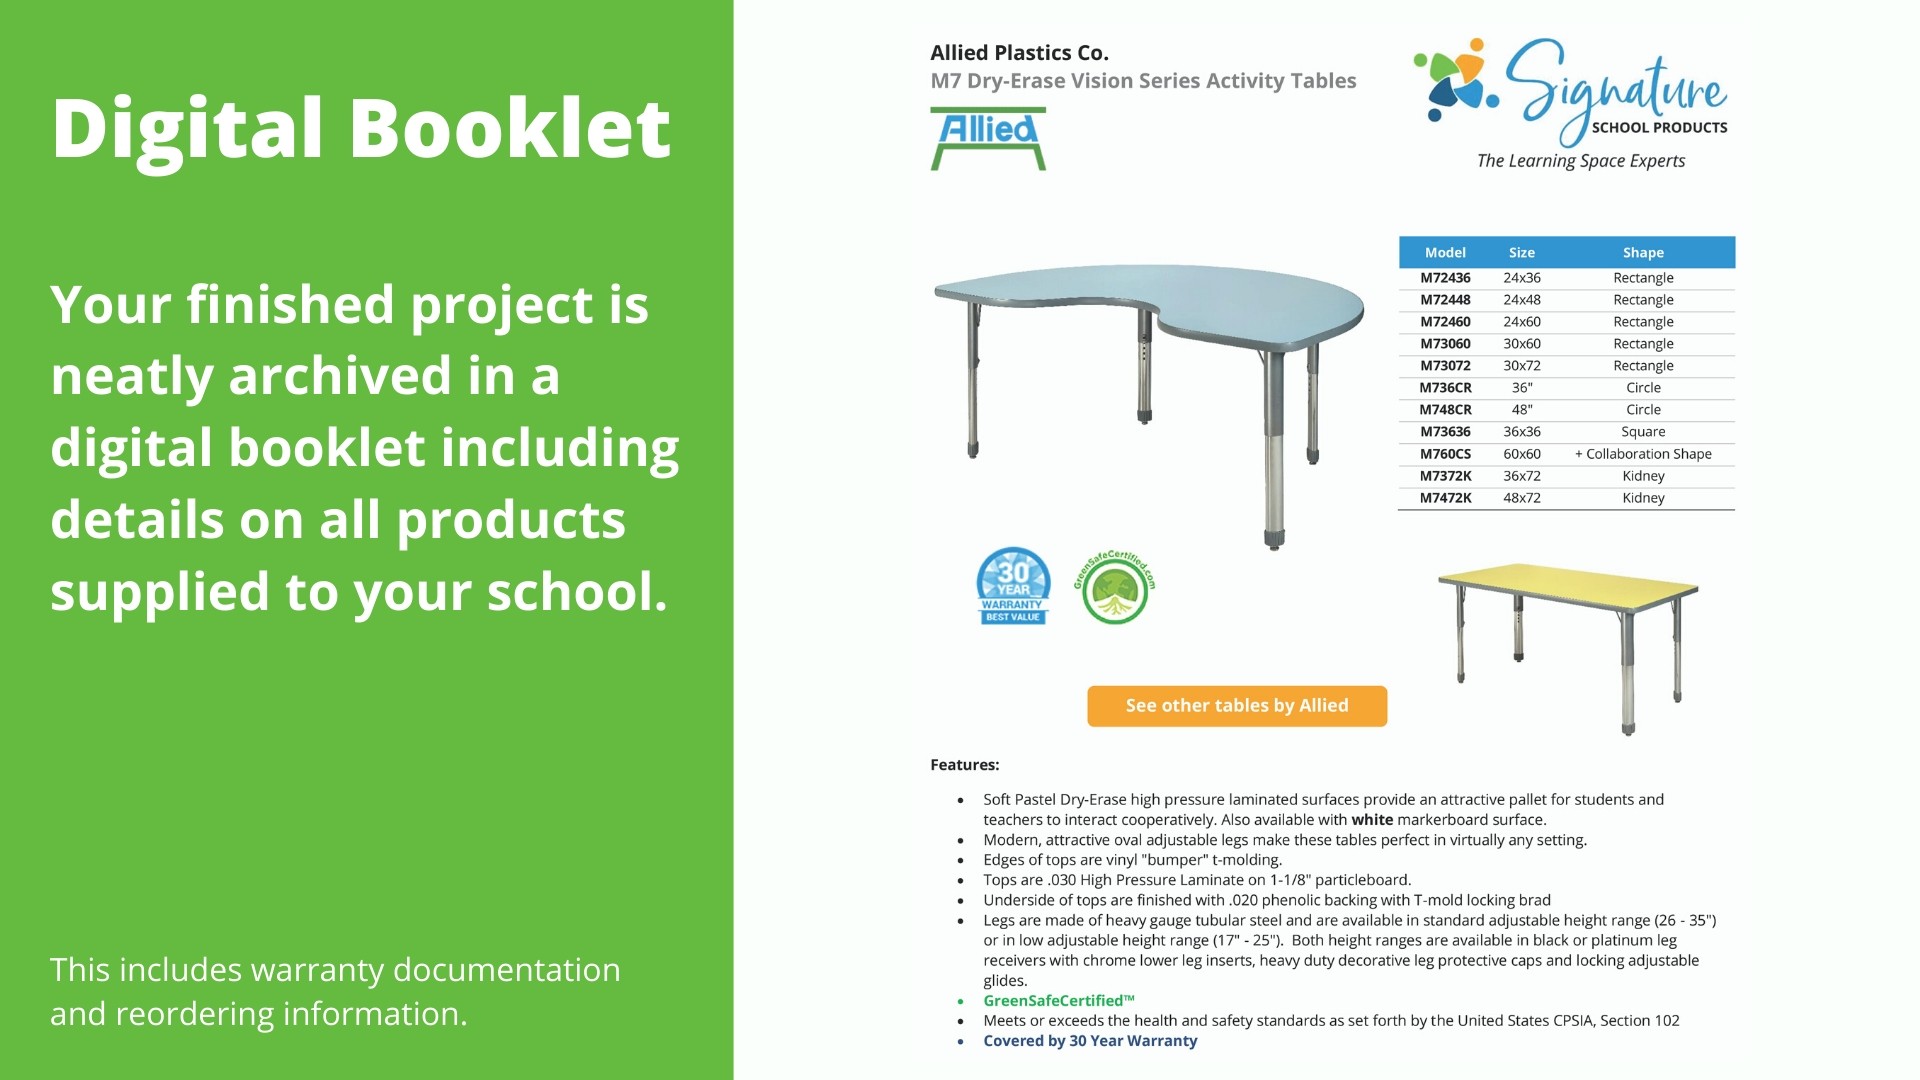 Your finished project is neatly archived in a digital booklet including details on all products supplied to your school, including warranty information